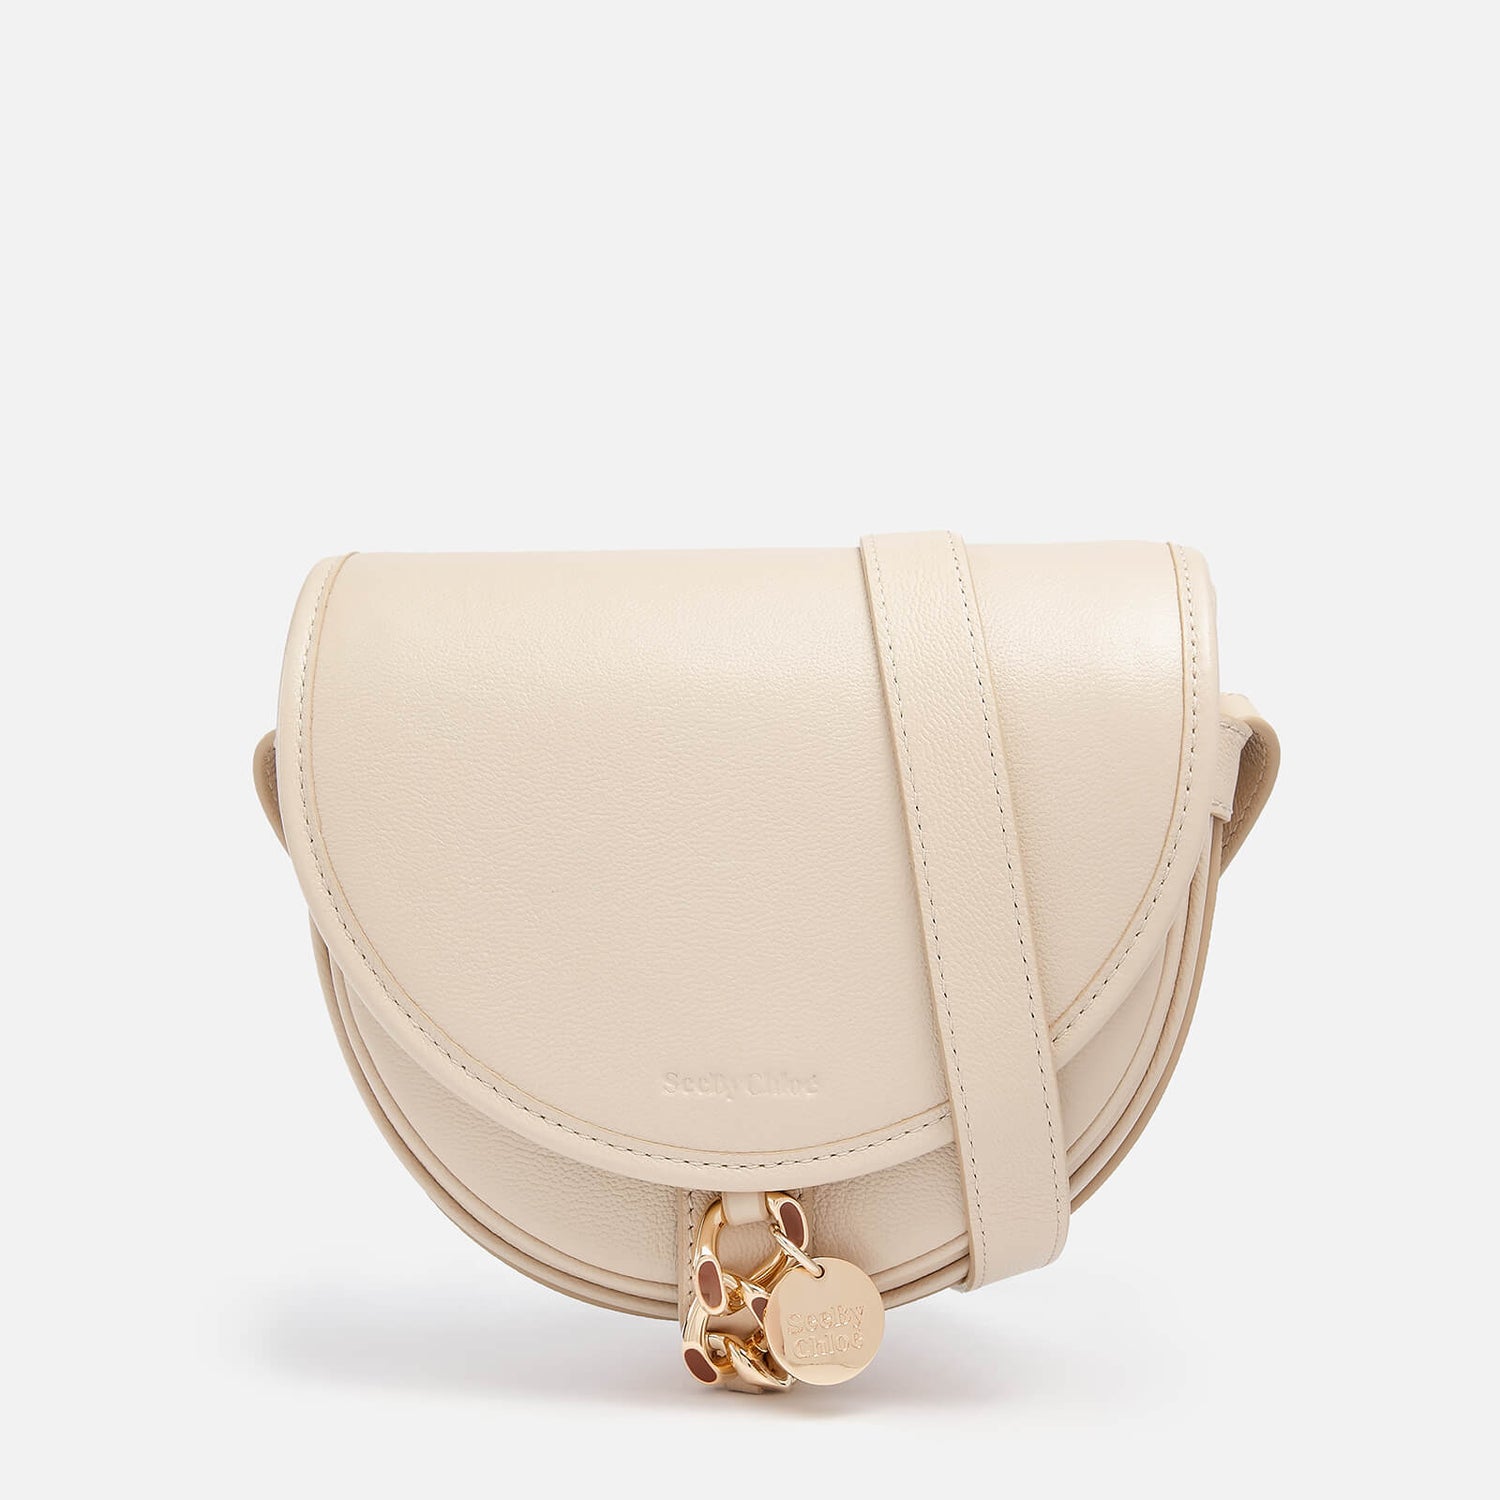 See By Chloé Women's Small Mara Saddle Bag - Cement Beige